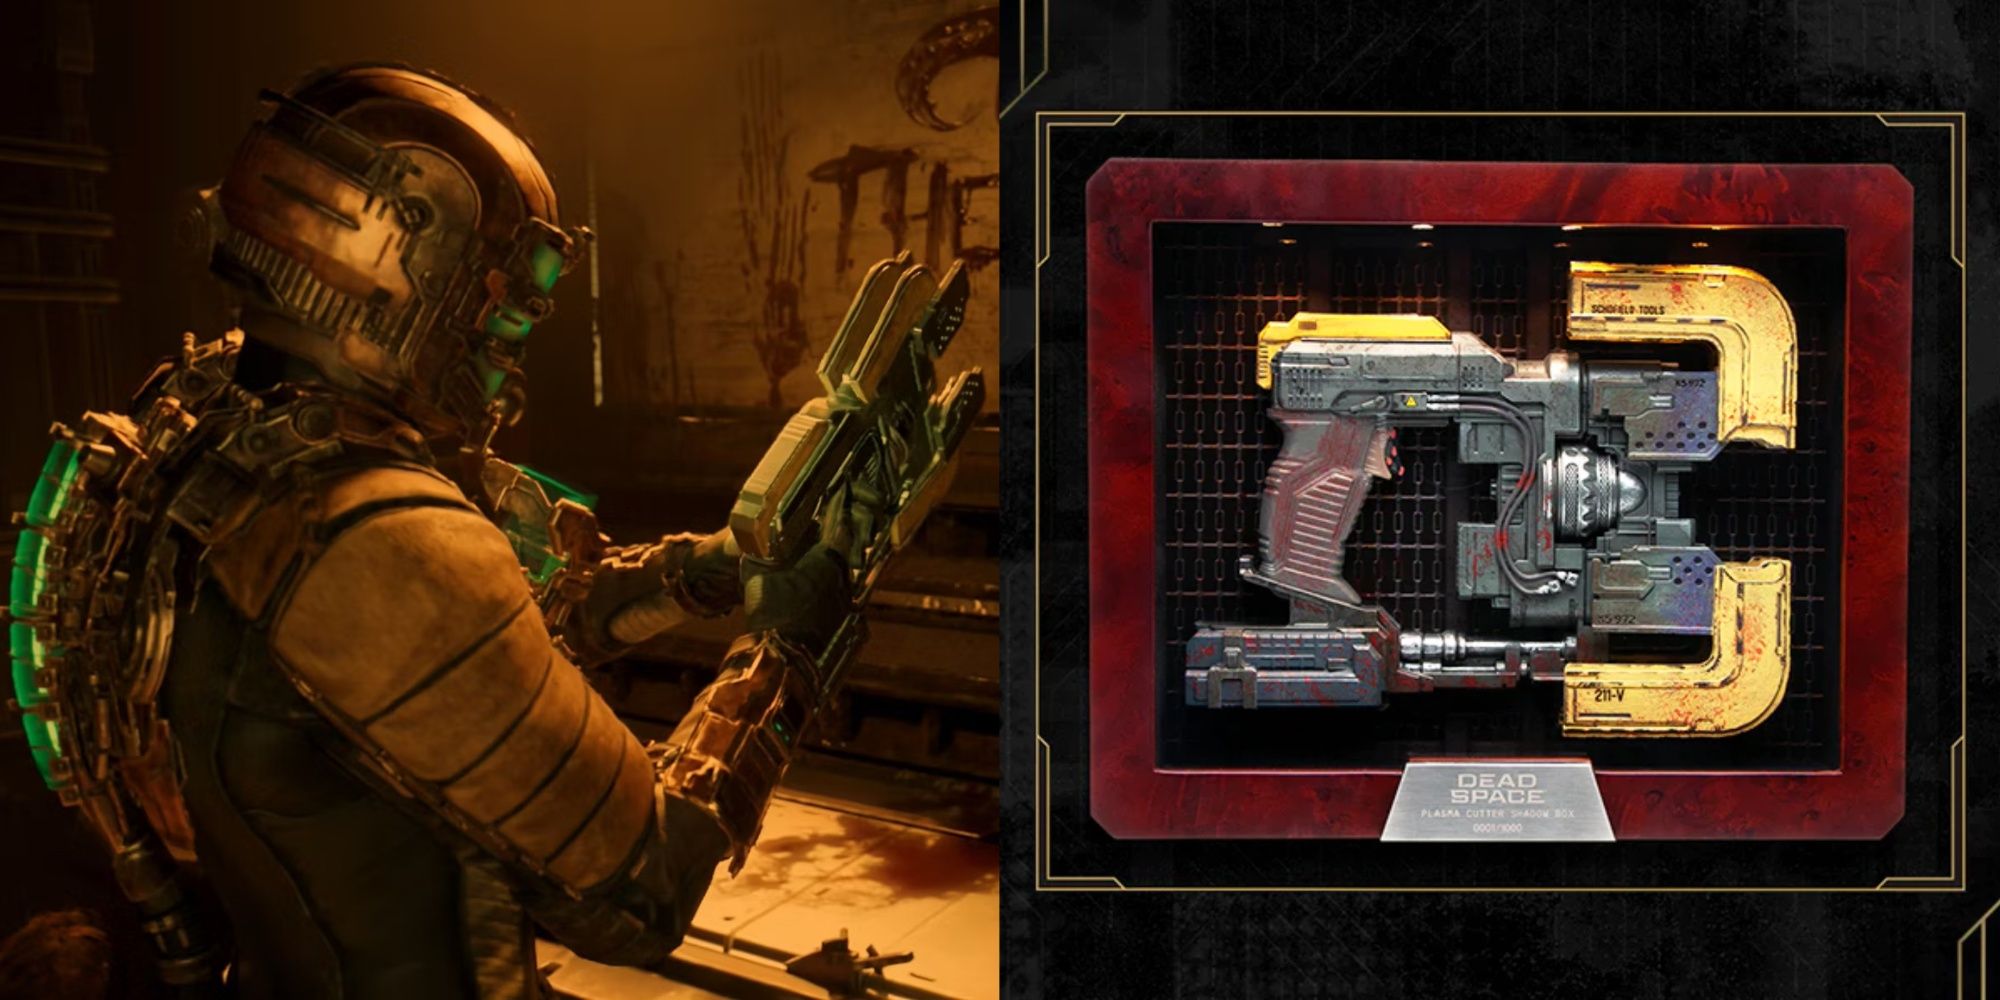 isaac clarke with the plasma cutter in dead space, and a shadowboxed plasma cutter